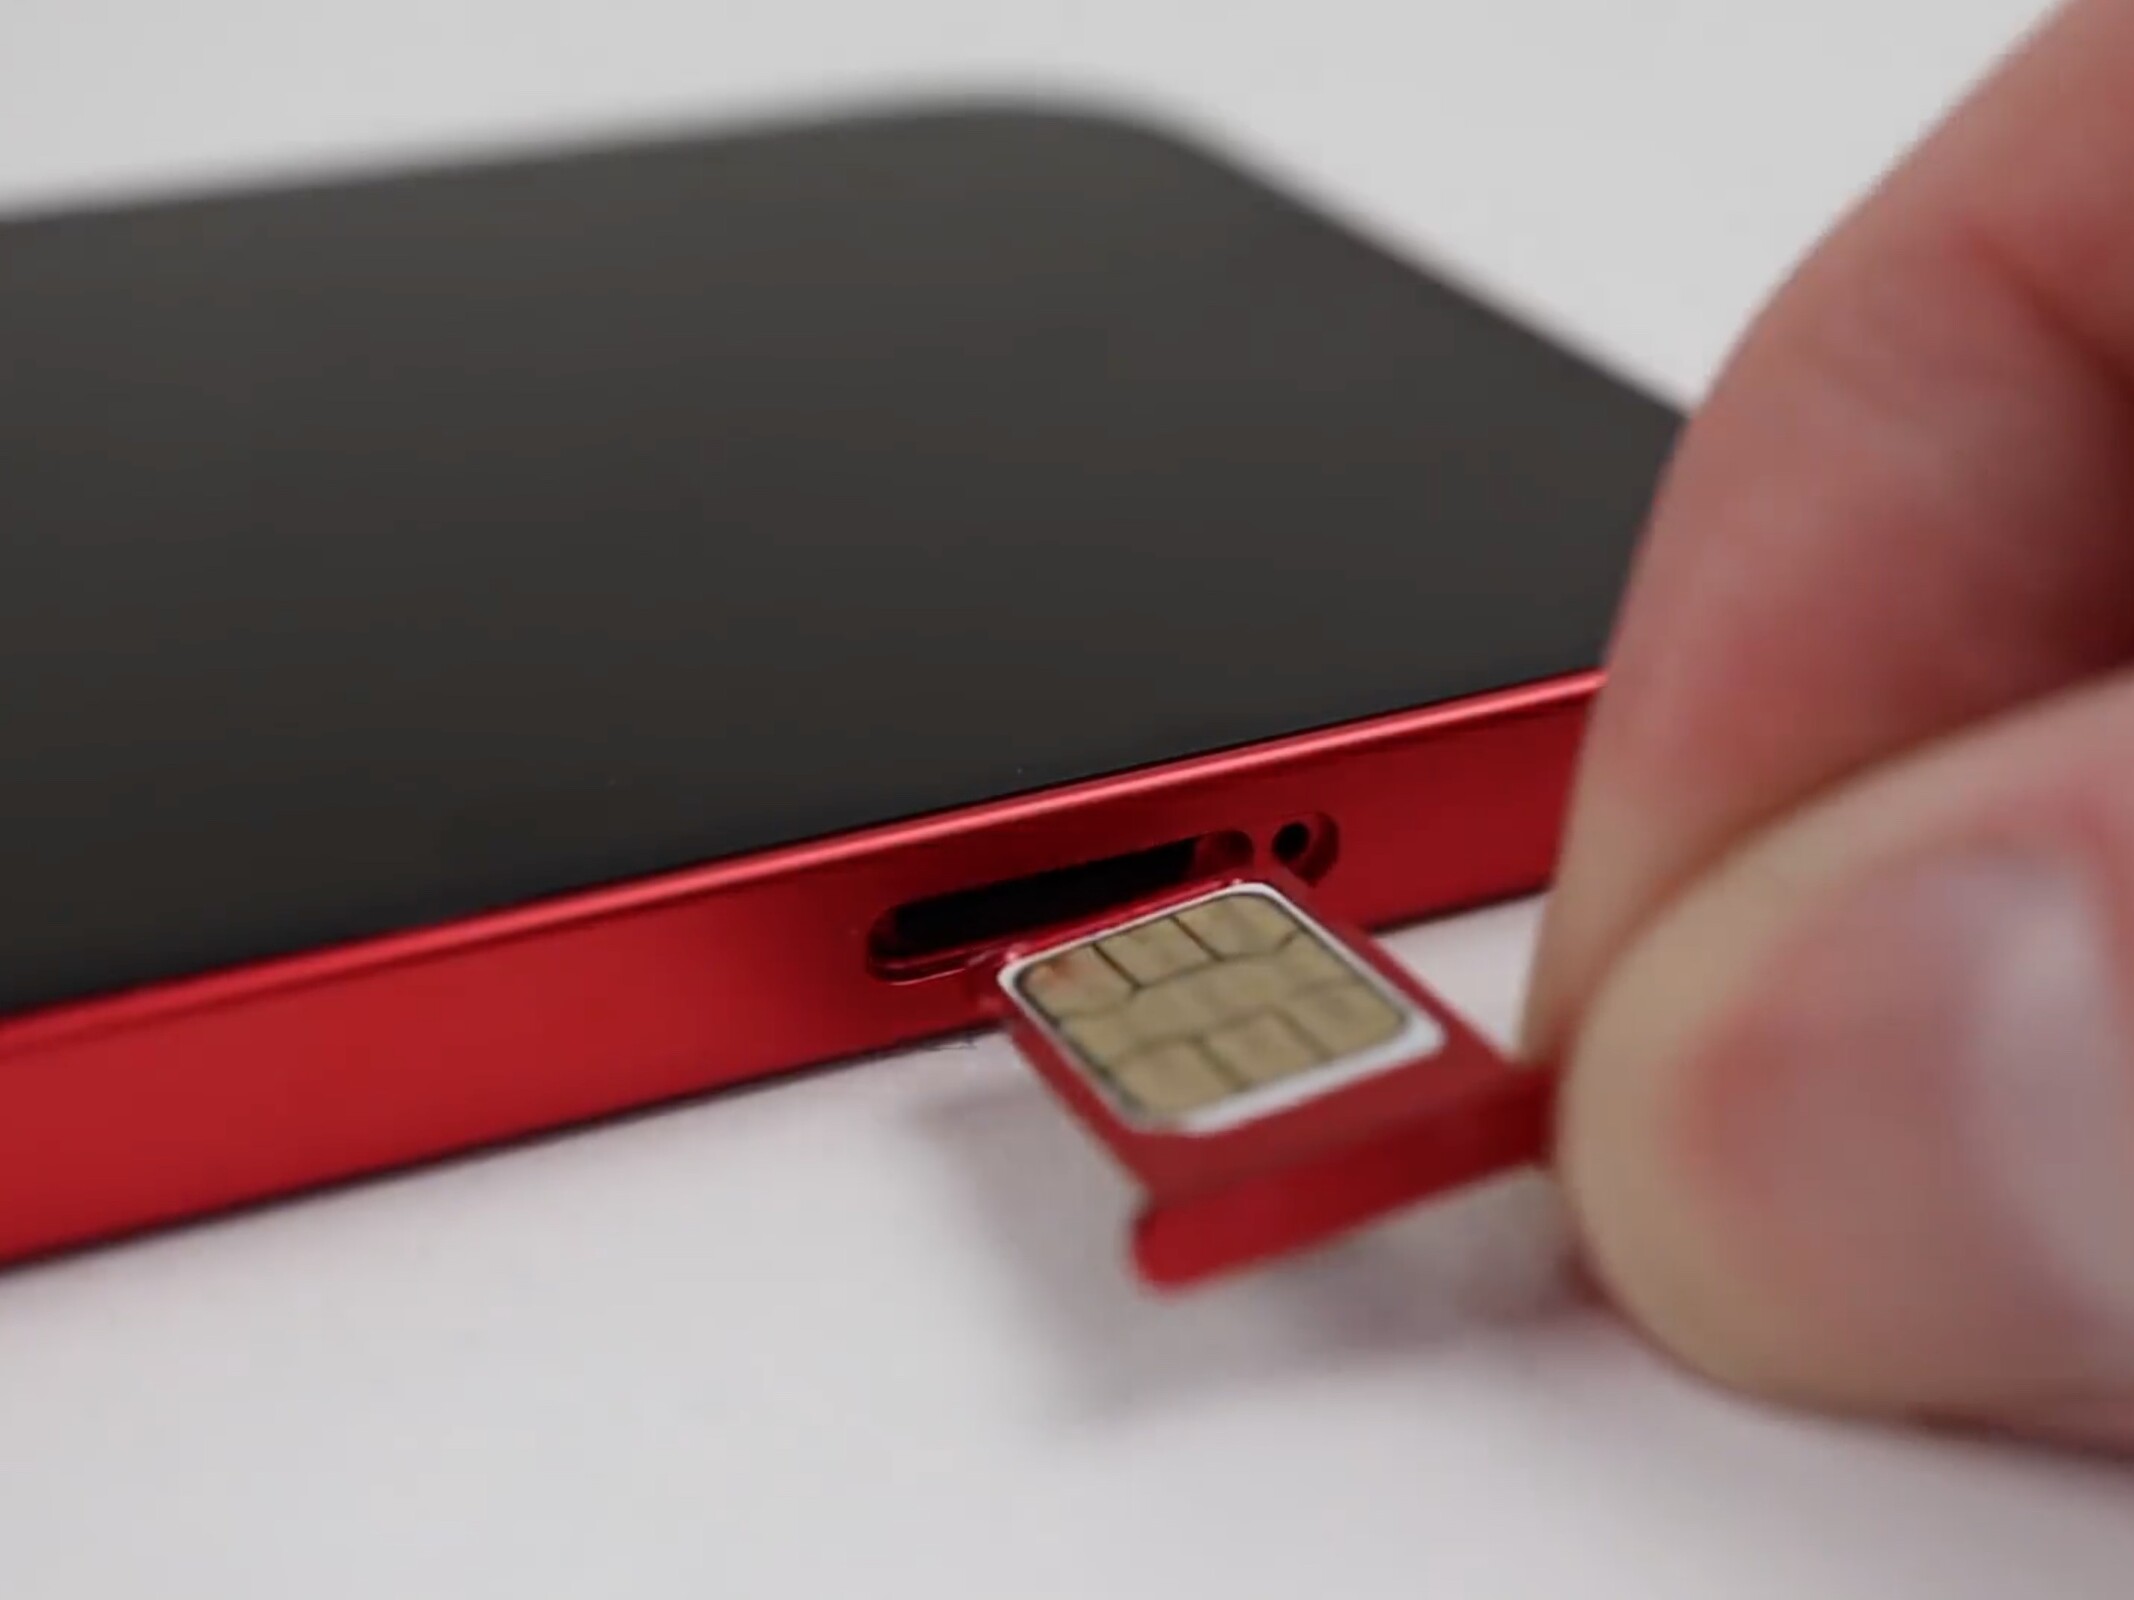 YouTube video shows how to add dual nano-SIM support to the iPhone 12